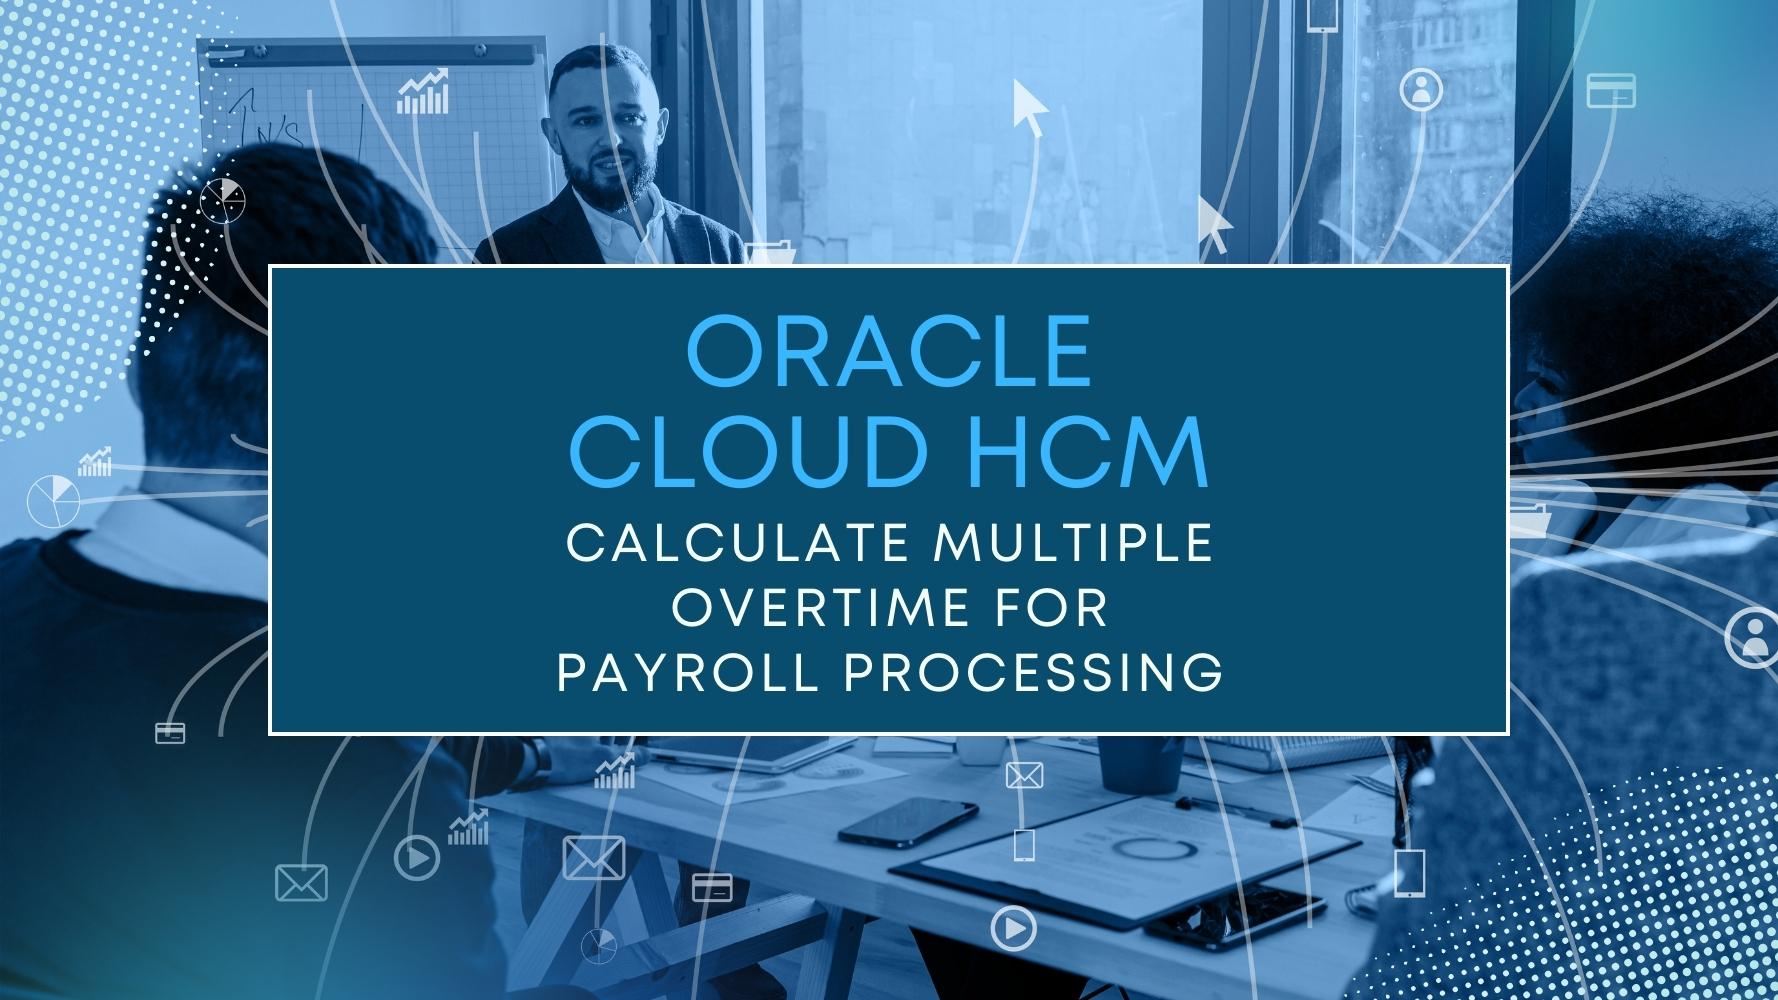 Oracle-Cloud-HCM_-Calculate-Multiple-overtime-for-Payroll-processing.jpg